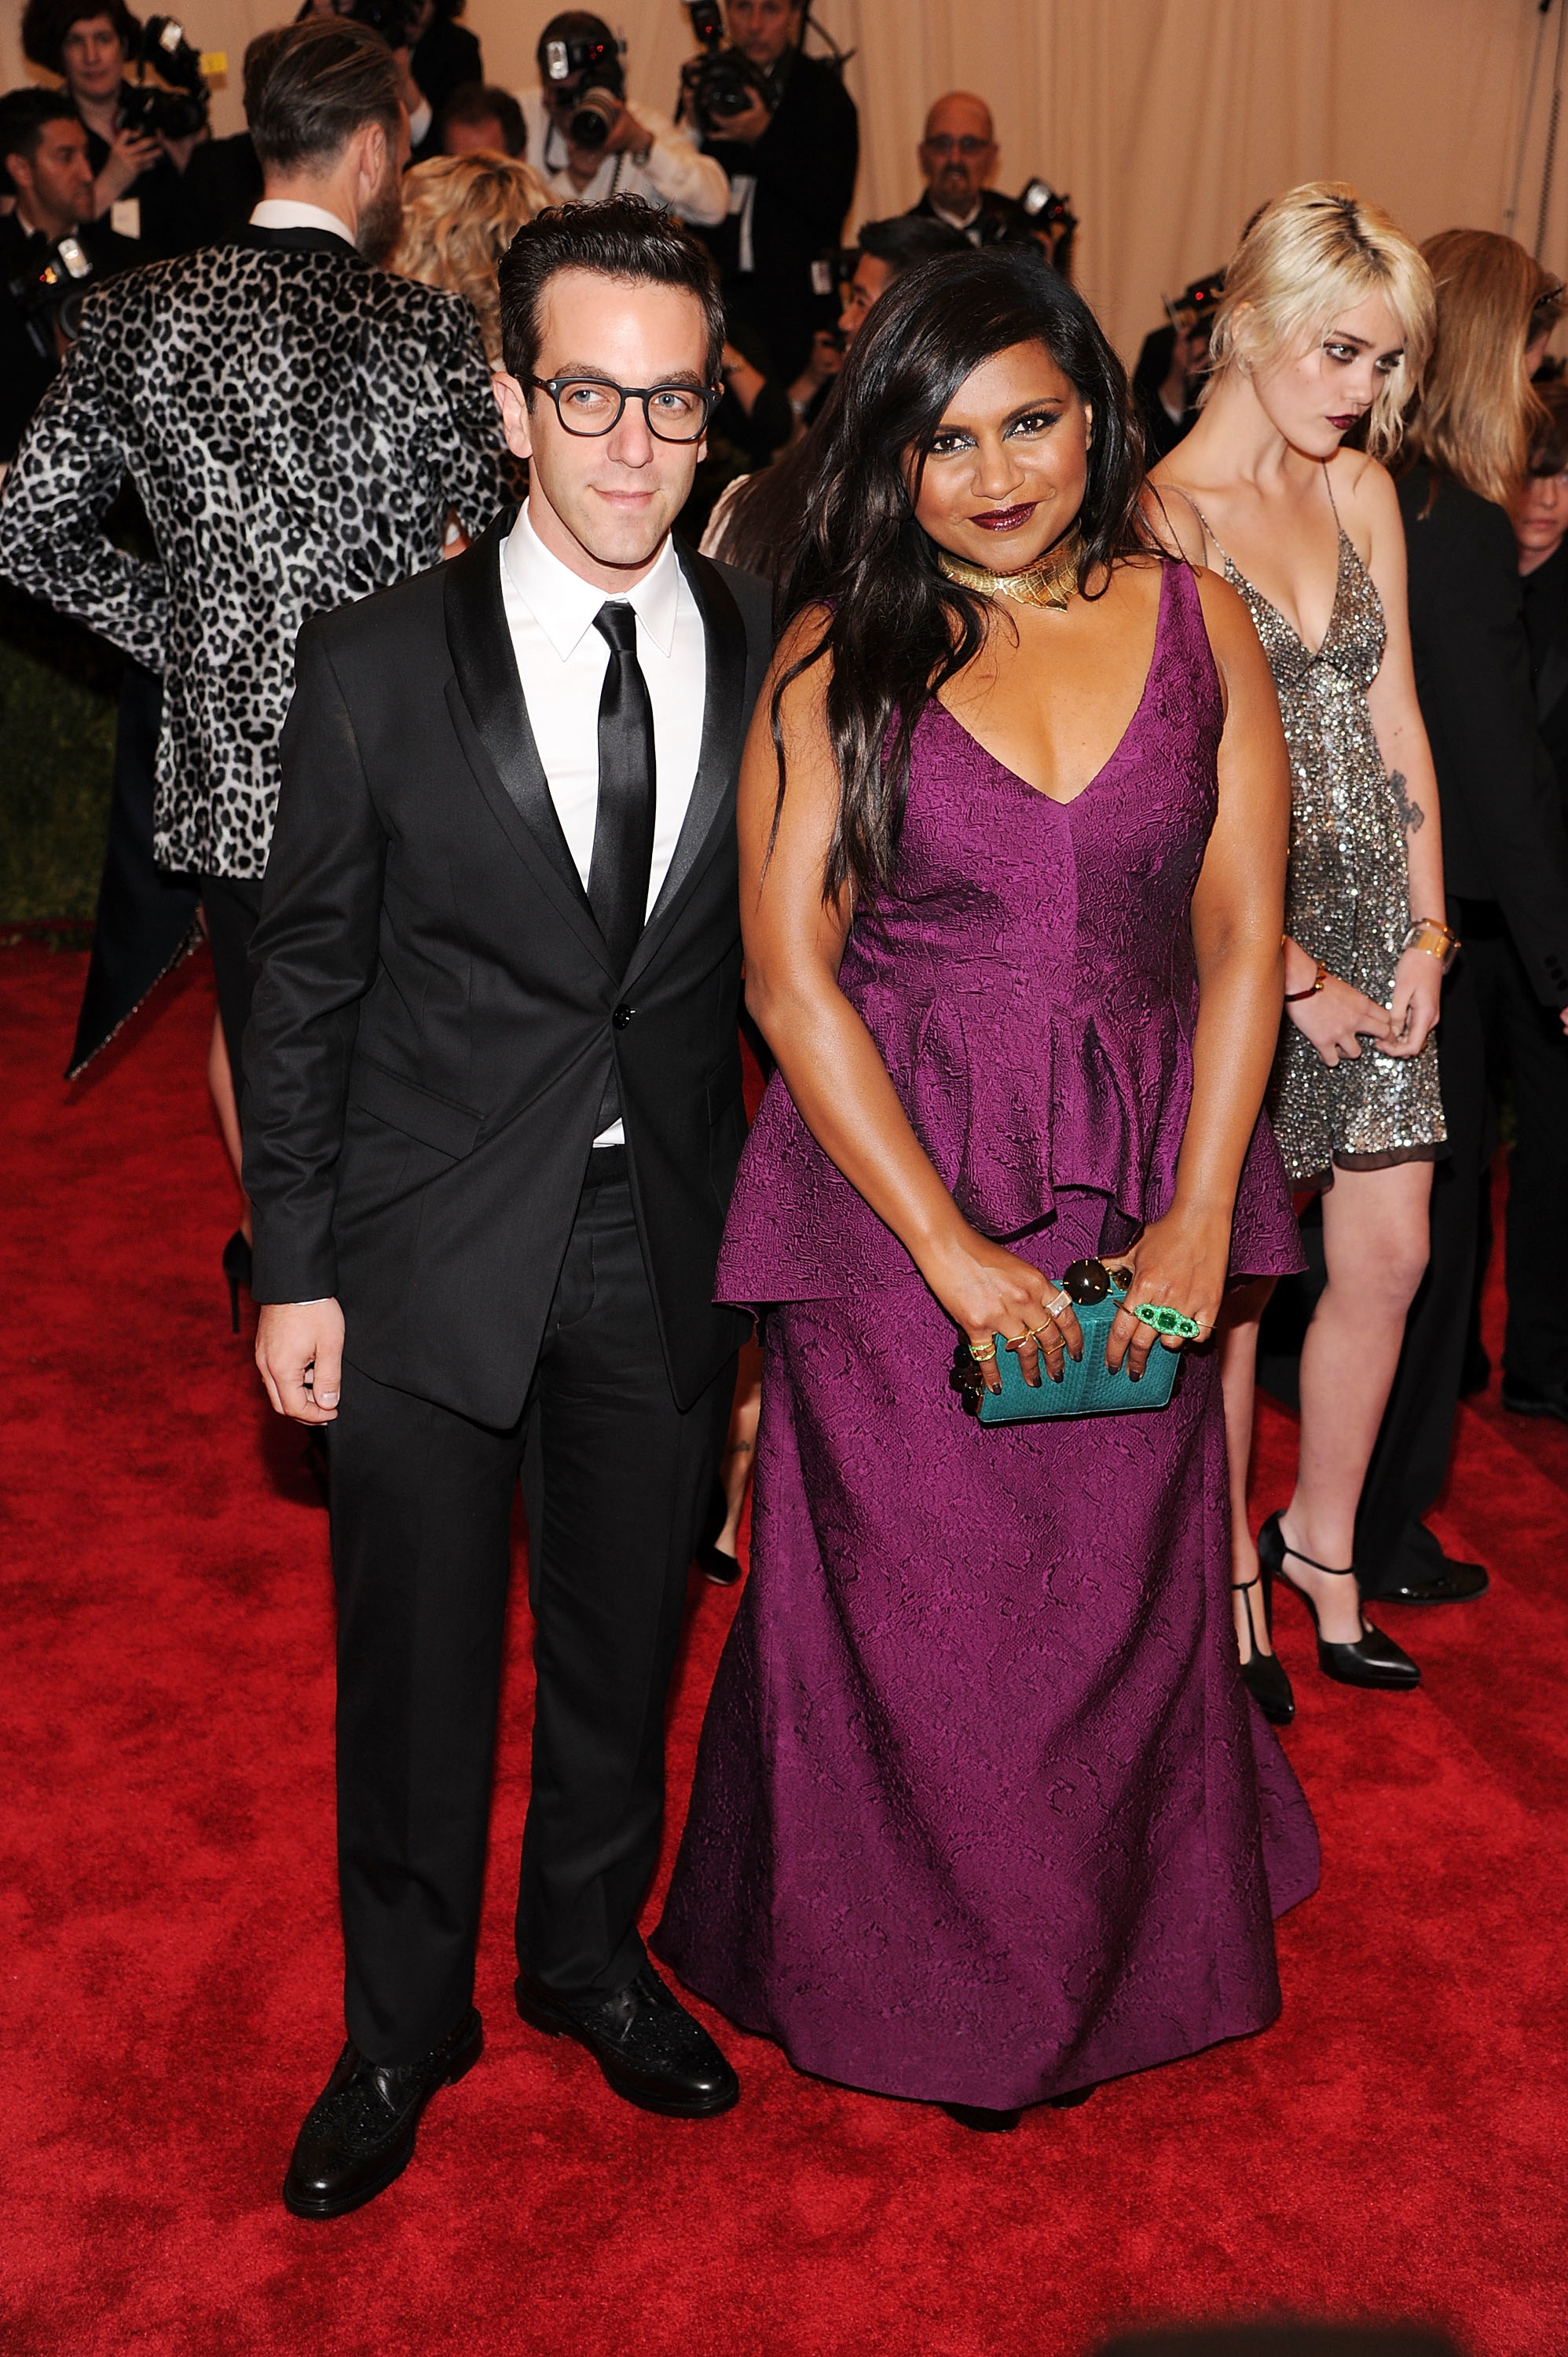 Man in a black suit stands next to a woman in a deep V-neck purple dress with a turquoise clutch at an event